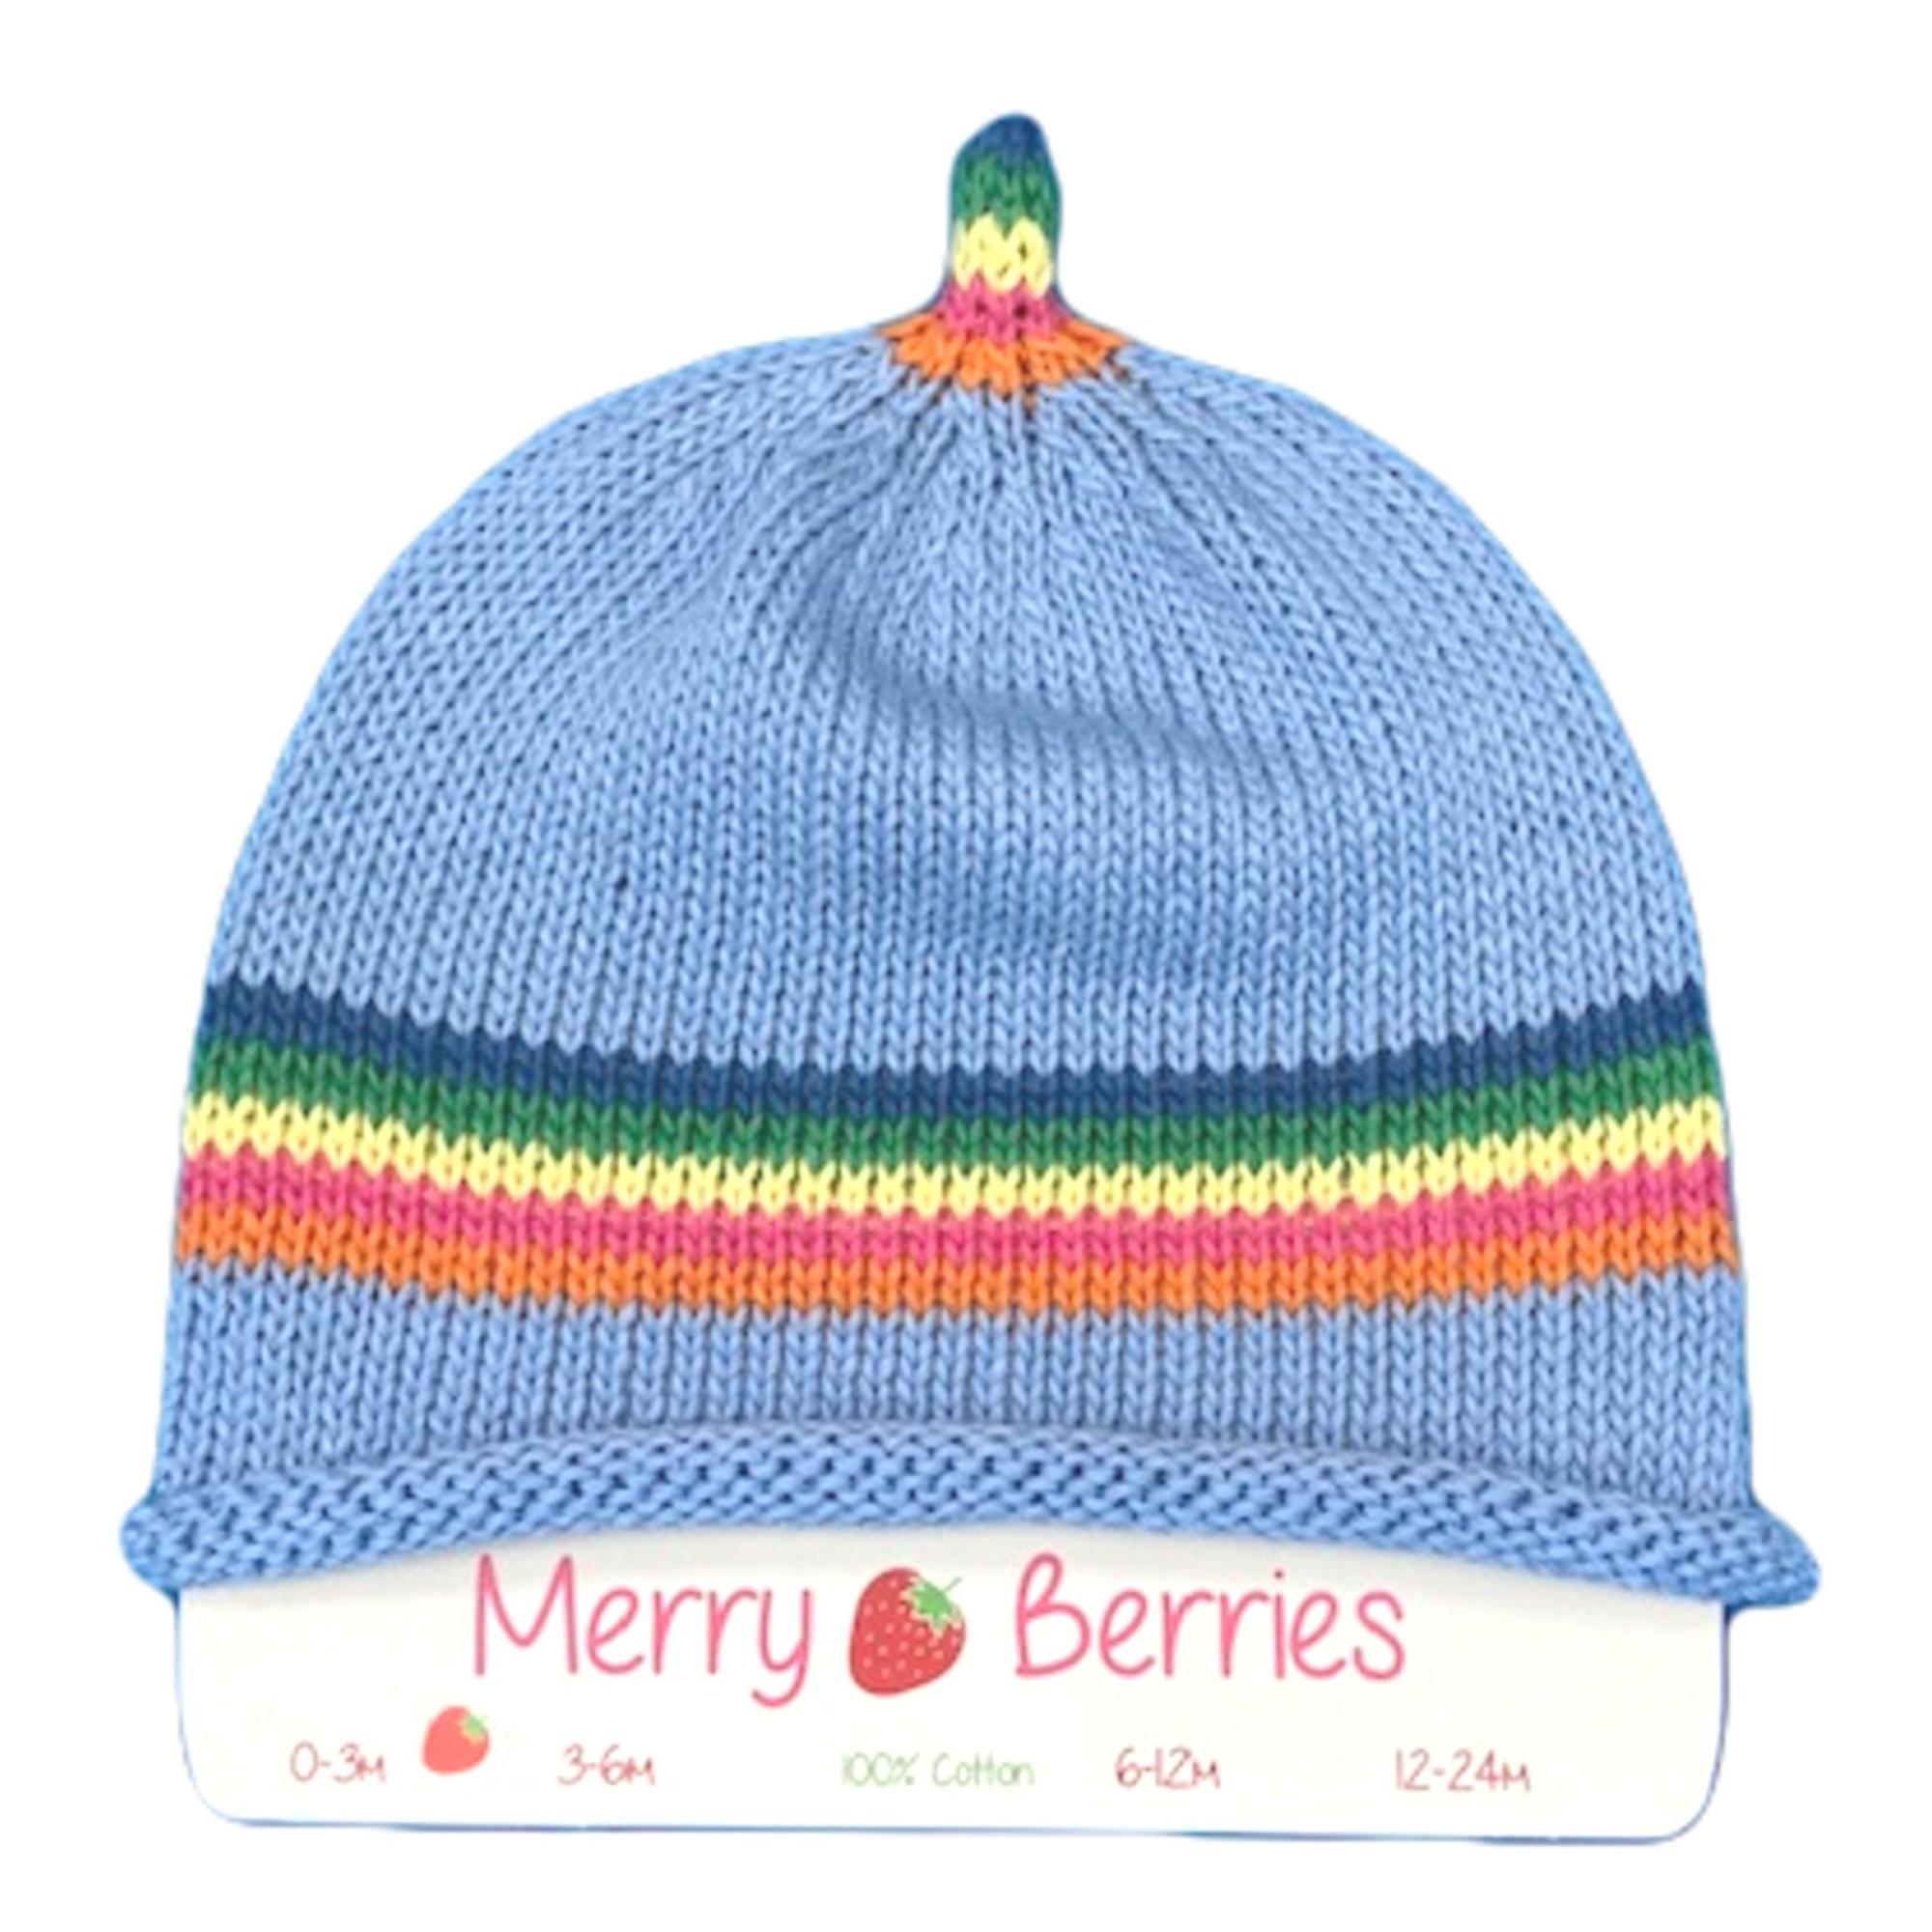 Merry Berries- Sky Rainbow Knitted Baby Hat- 0-24 Months- Cotton